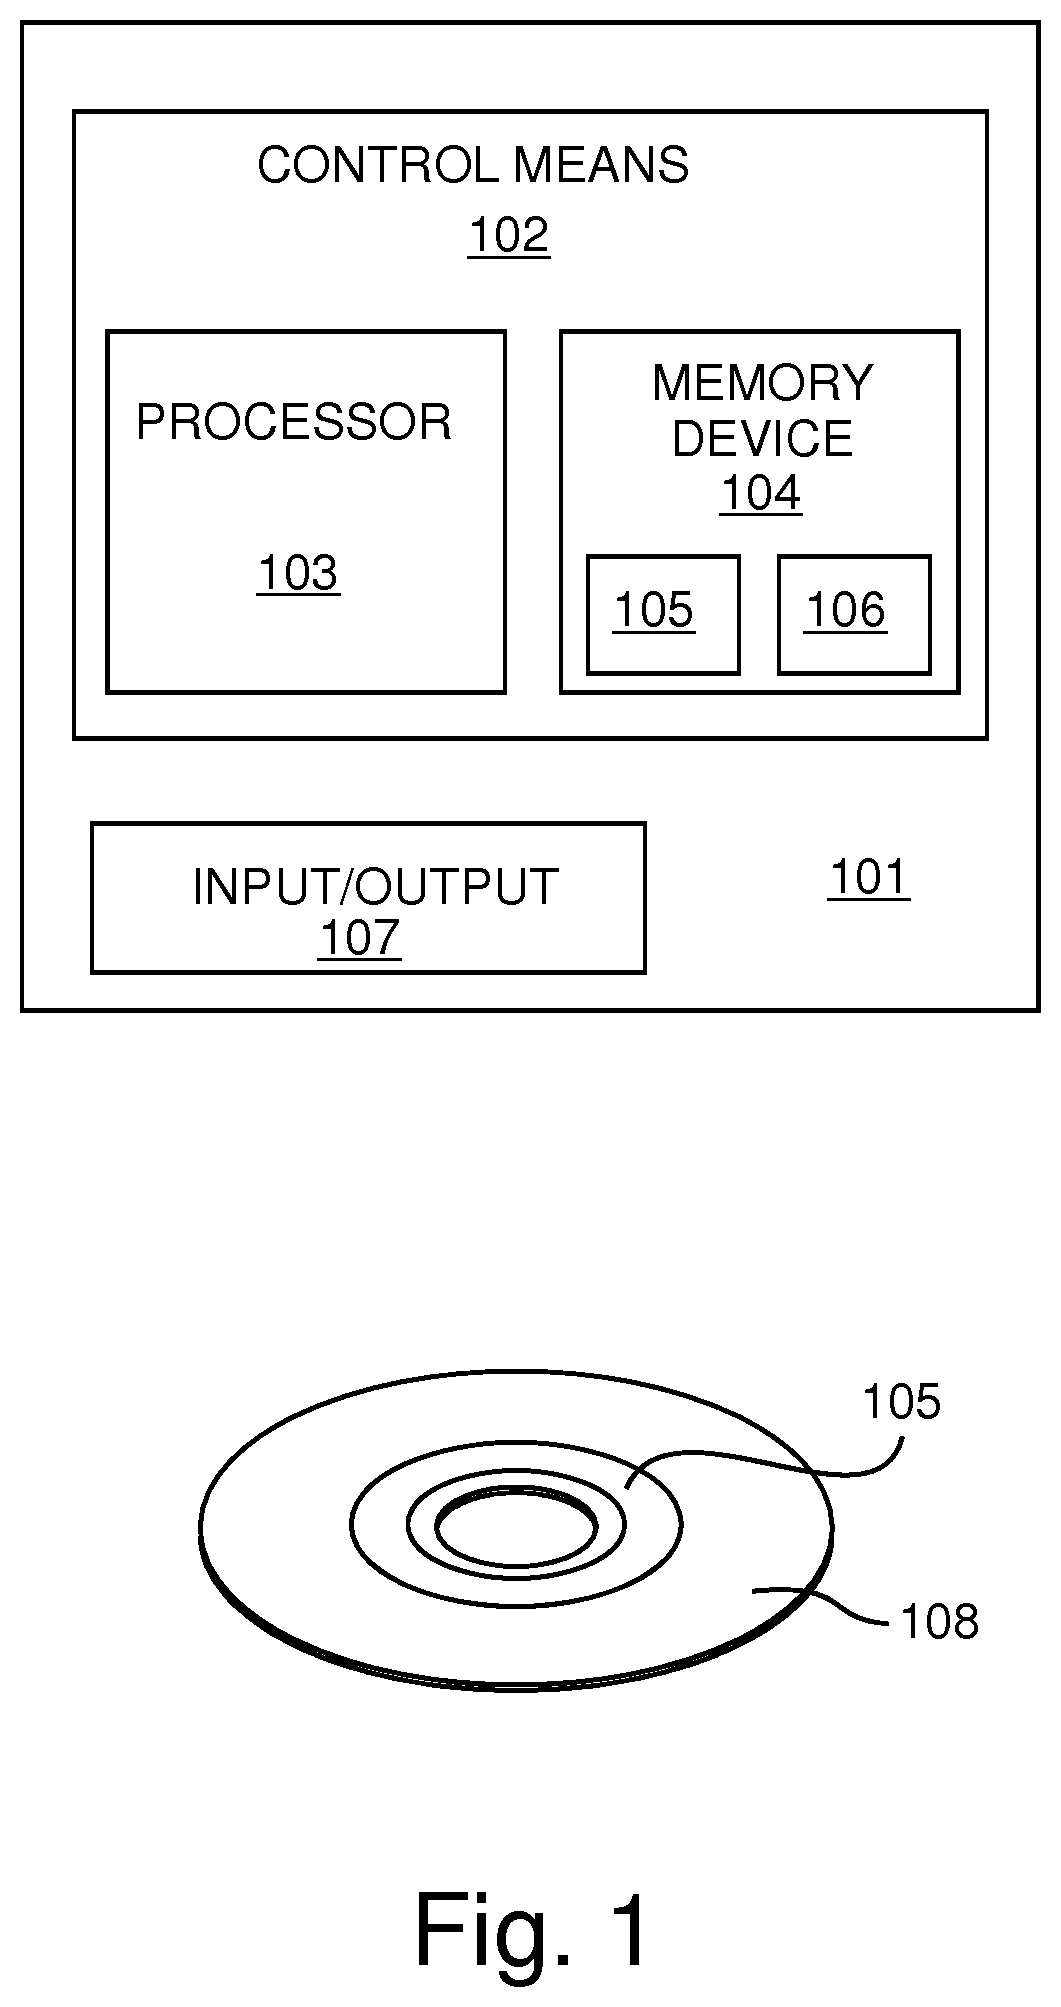 Apparatus and method for enabling storing of a user input vehicle setting